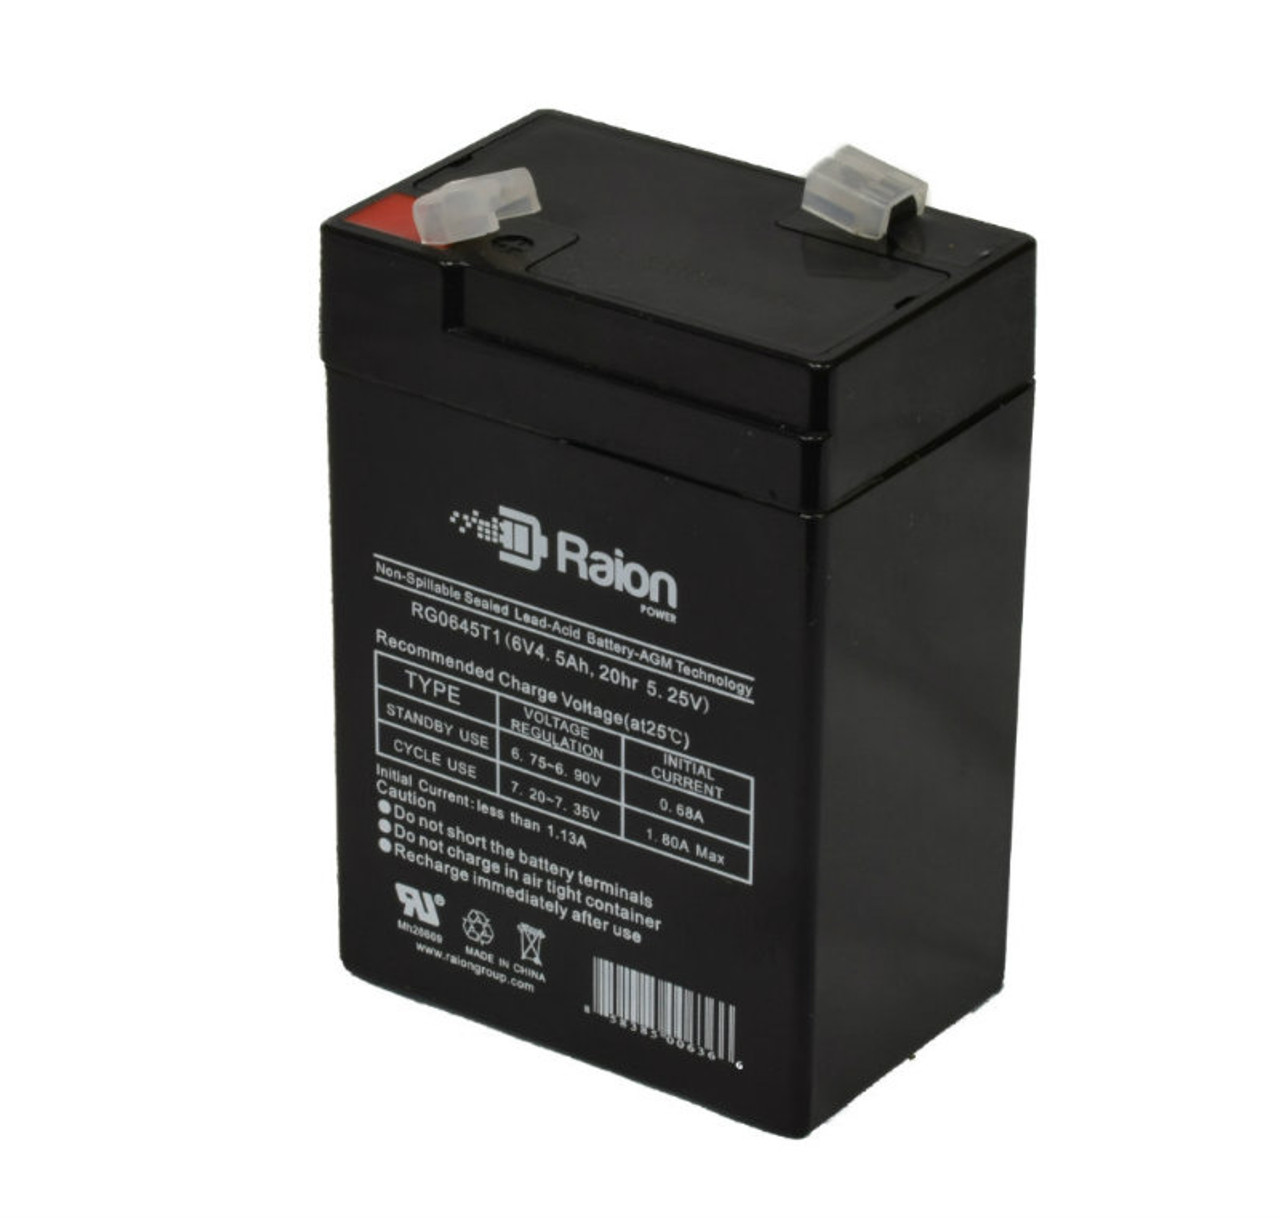 Raion Power RG0645T1 6V 4.5Ah Replacement Battery Cartridge for Chloride CEL